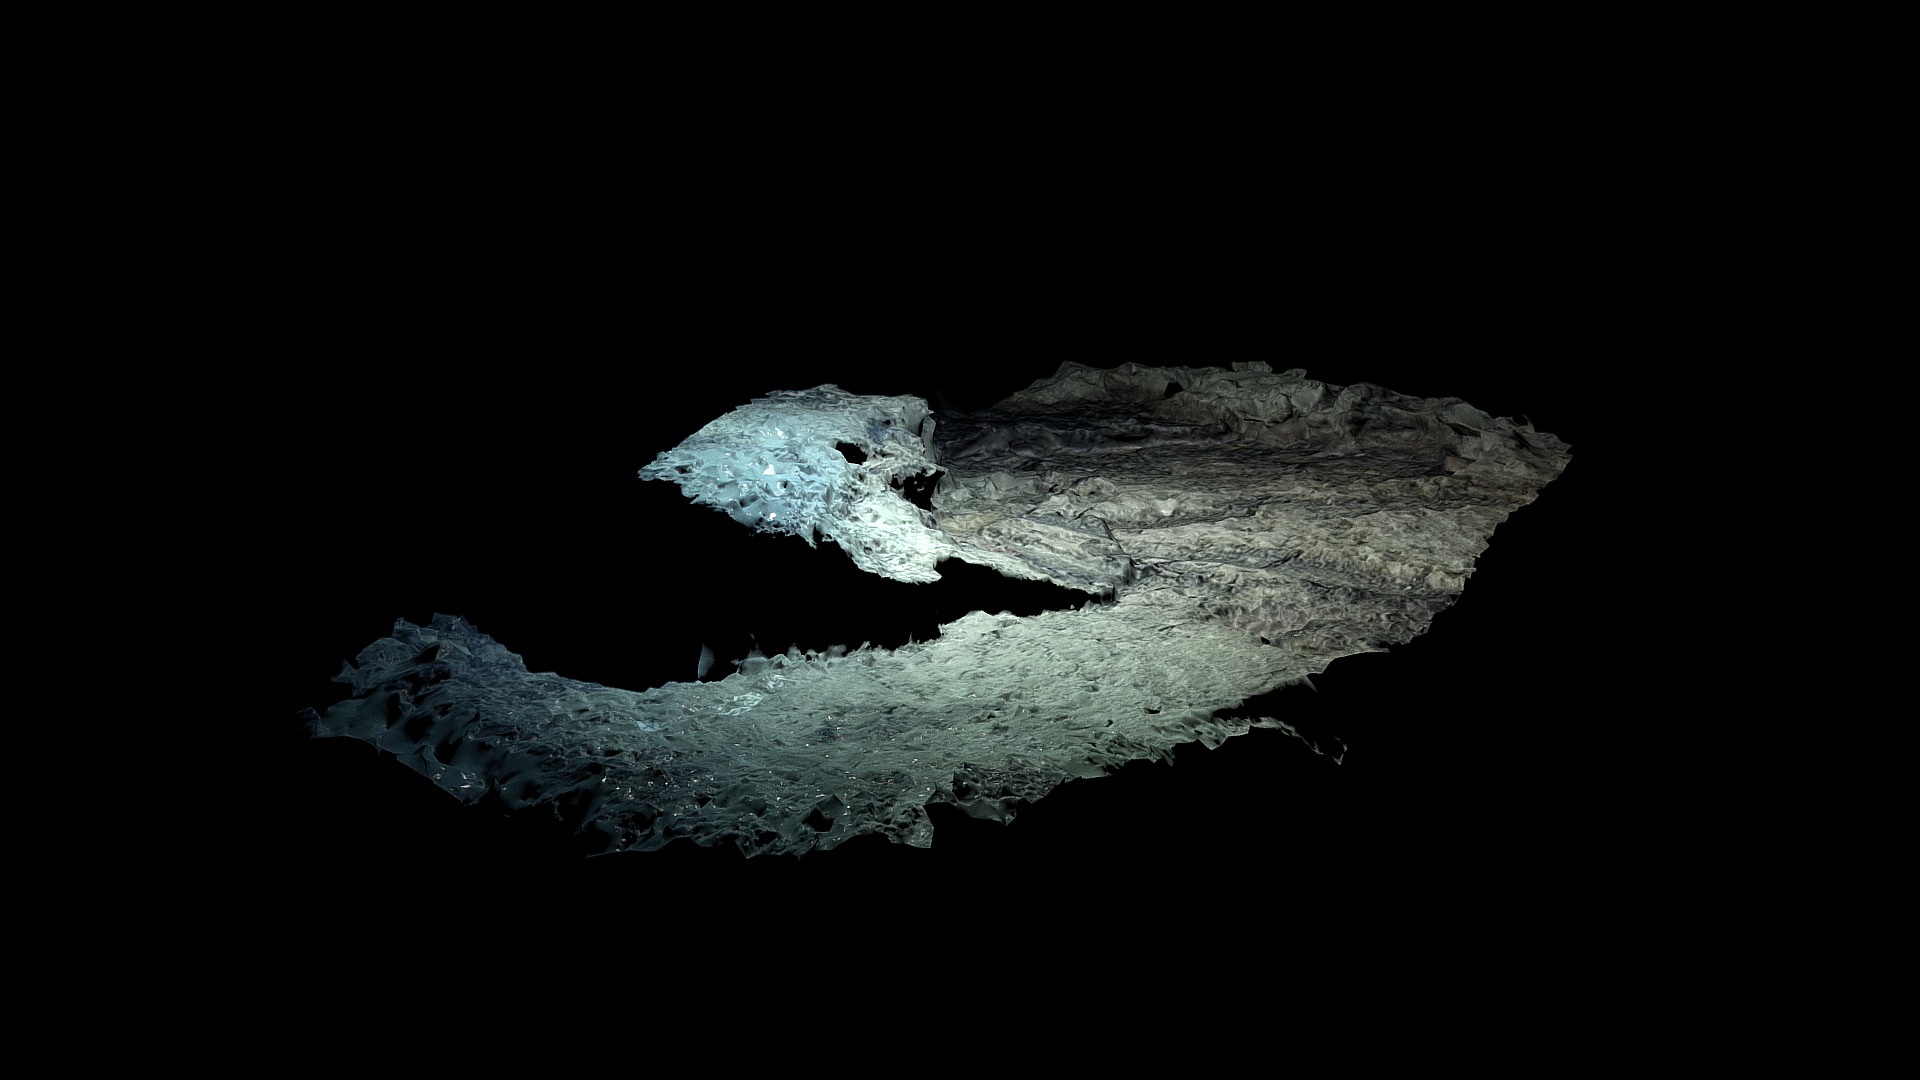 3D model Low Poly Deep Sea Ground Surface #1 - This is a 3D model of the Low Poly Deep Sea Ground Surface #1. The 3D model is about a white rock with a black background.